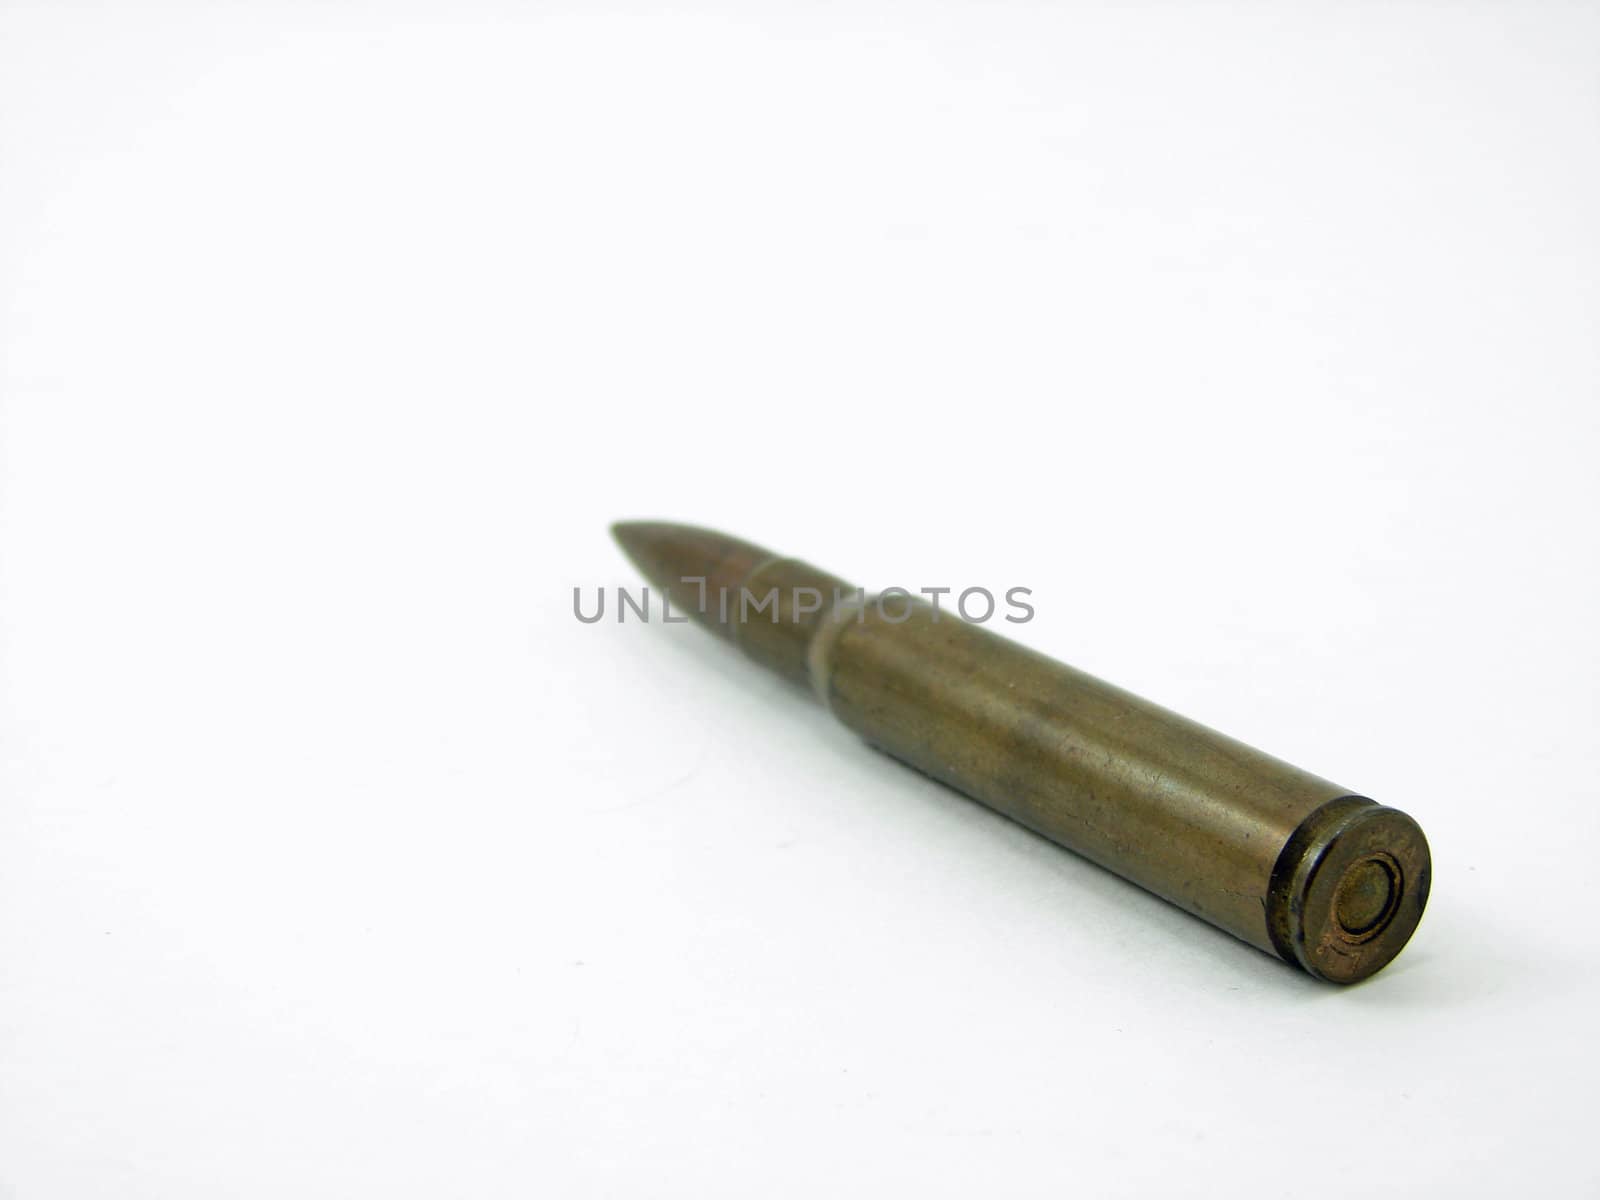 Antique Bullet on White Background by bellafotosolo